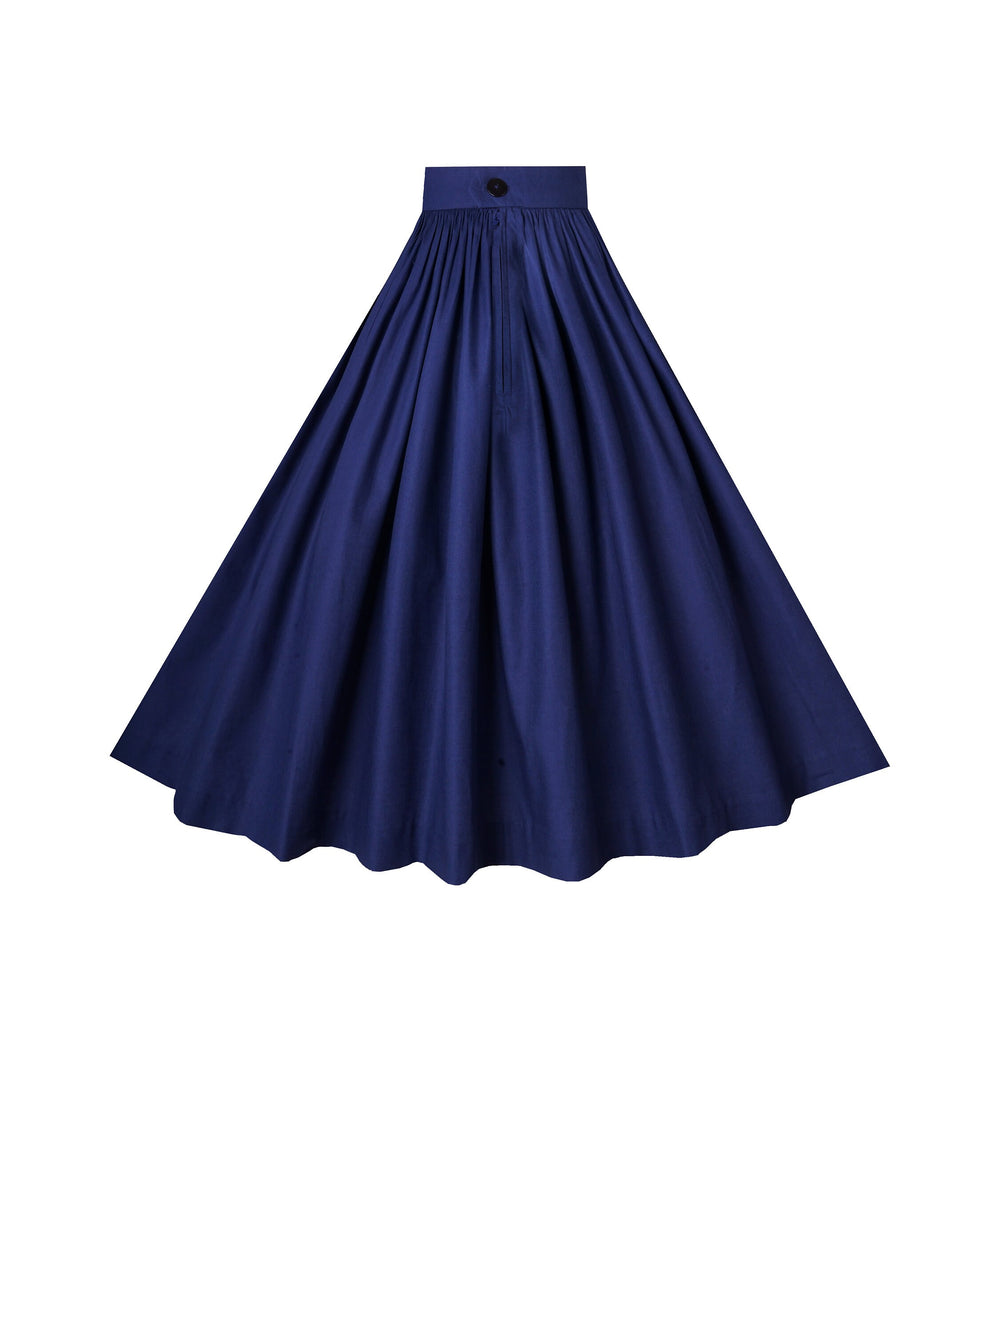 RTS - Size S - Lola Skirt in Navy Blue Cotton